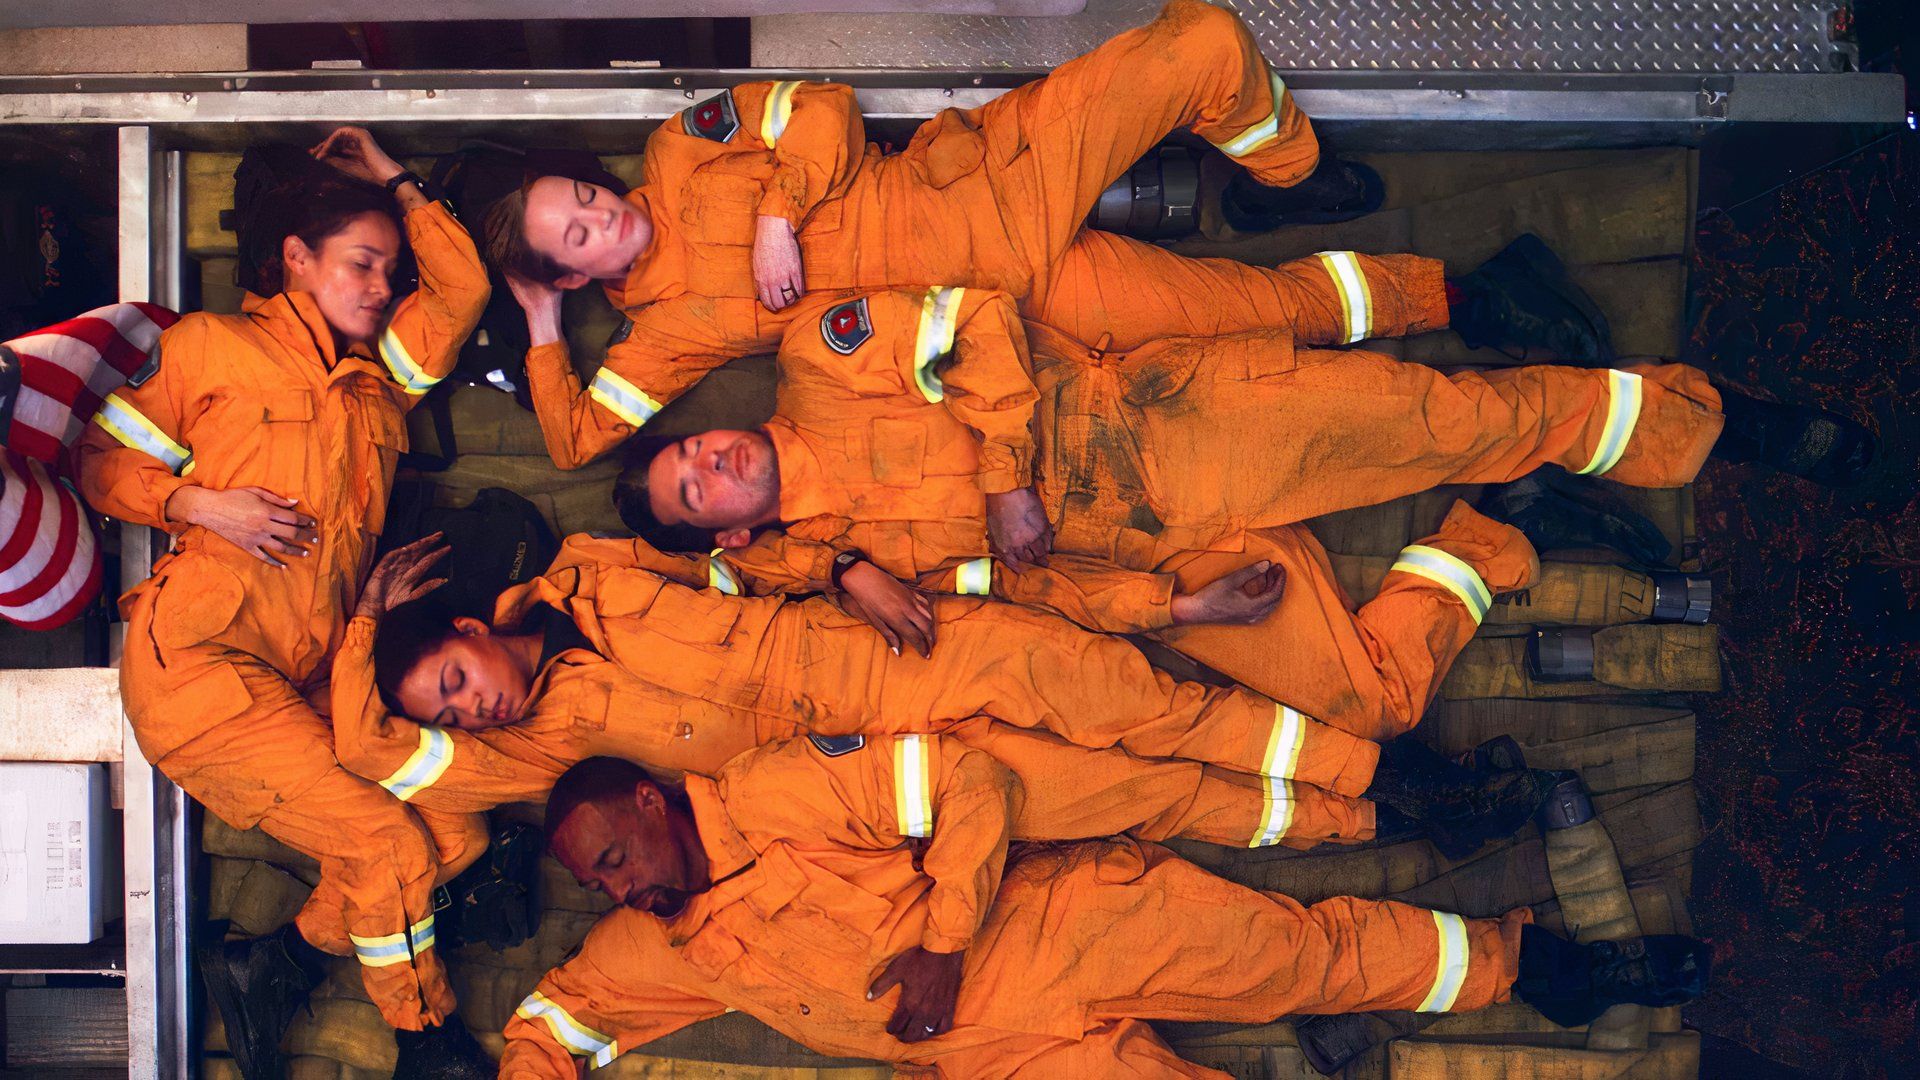 The crew sleeps on the engine in Station 19